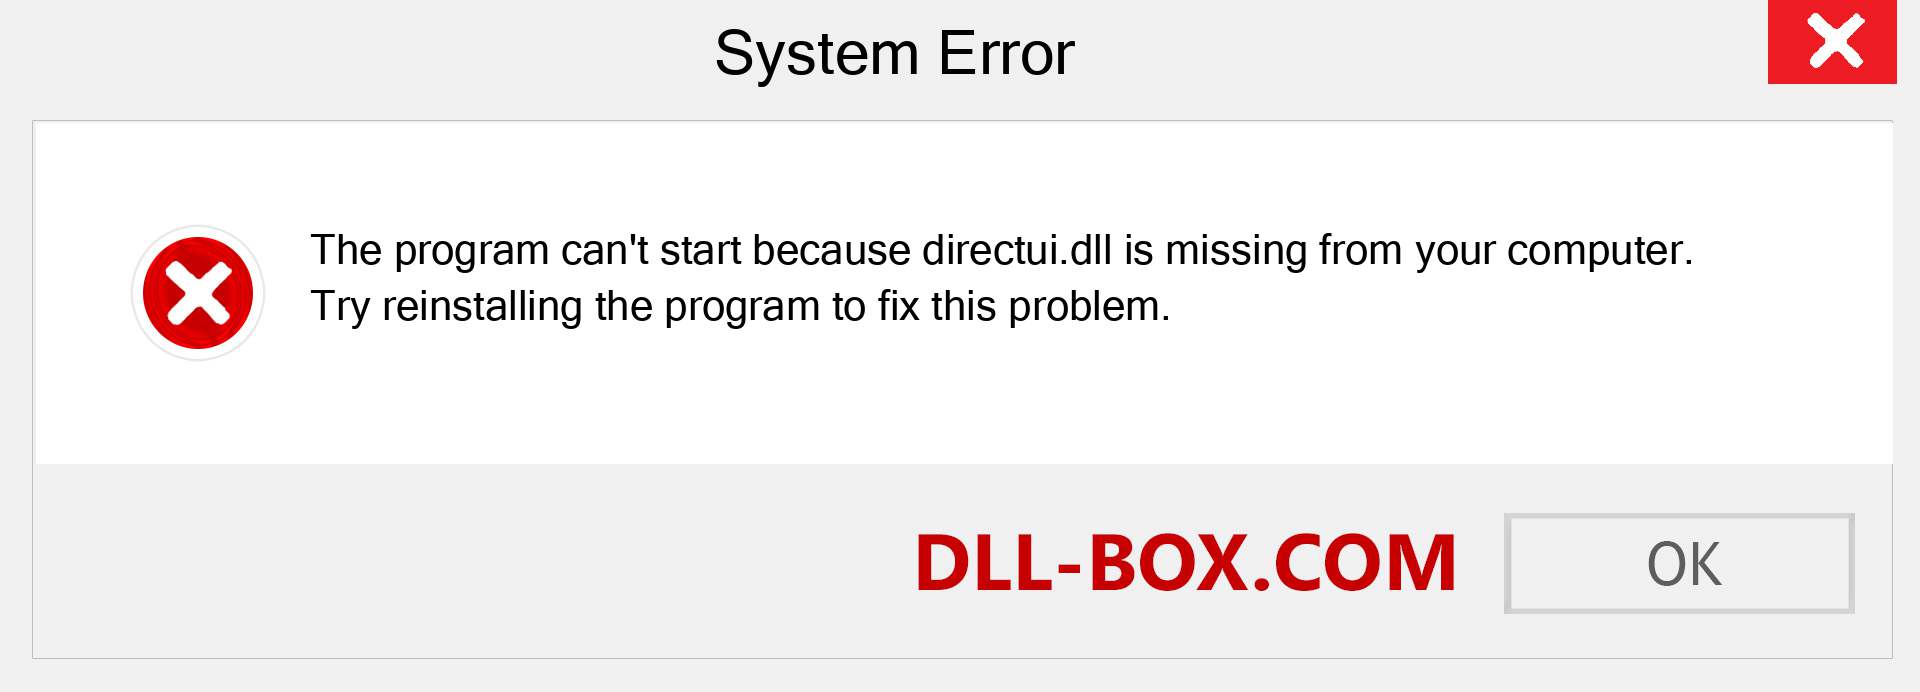  directui.dll file is missing?. Download for Windows 7, 8, 10 - Fix  directui dll Missing Error on Windows, photos, images